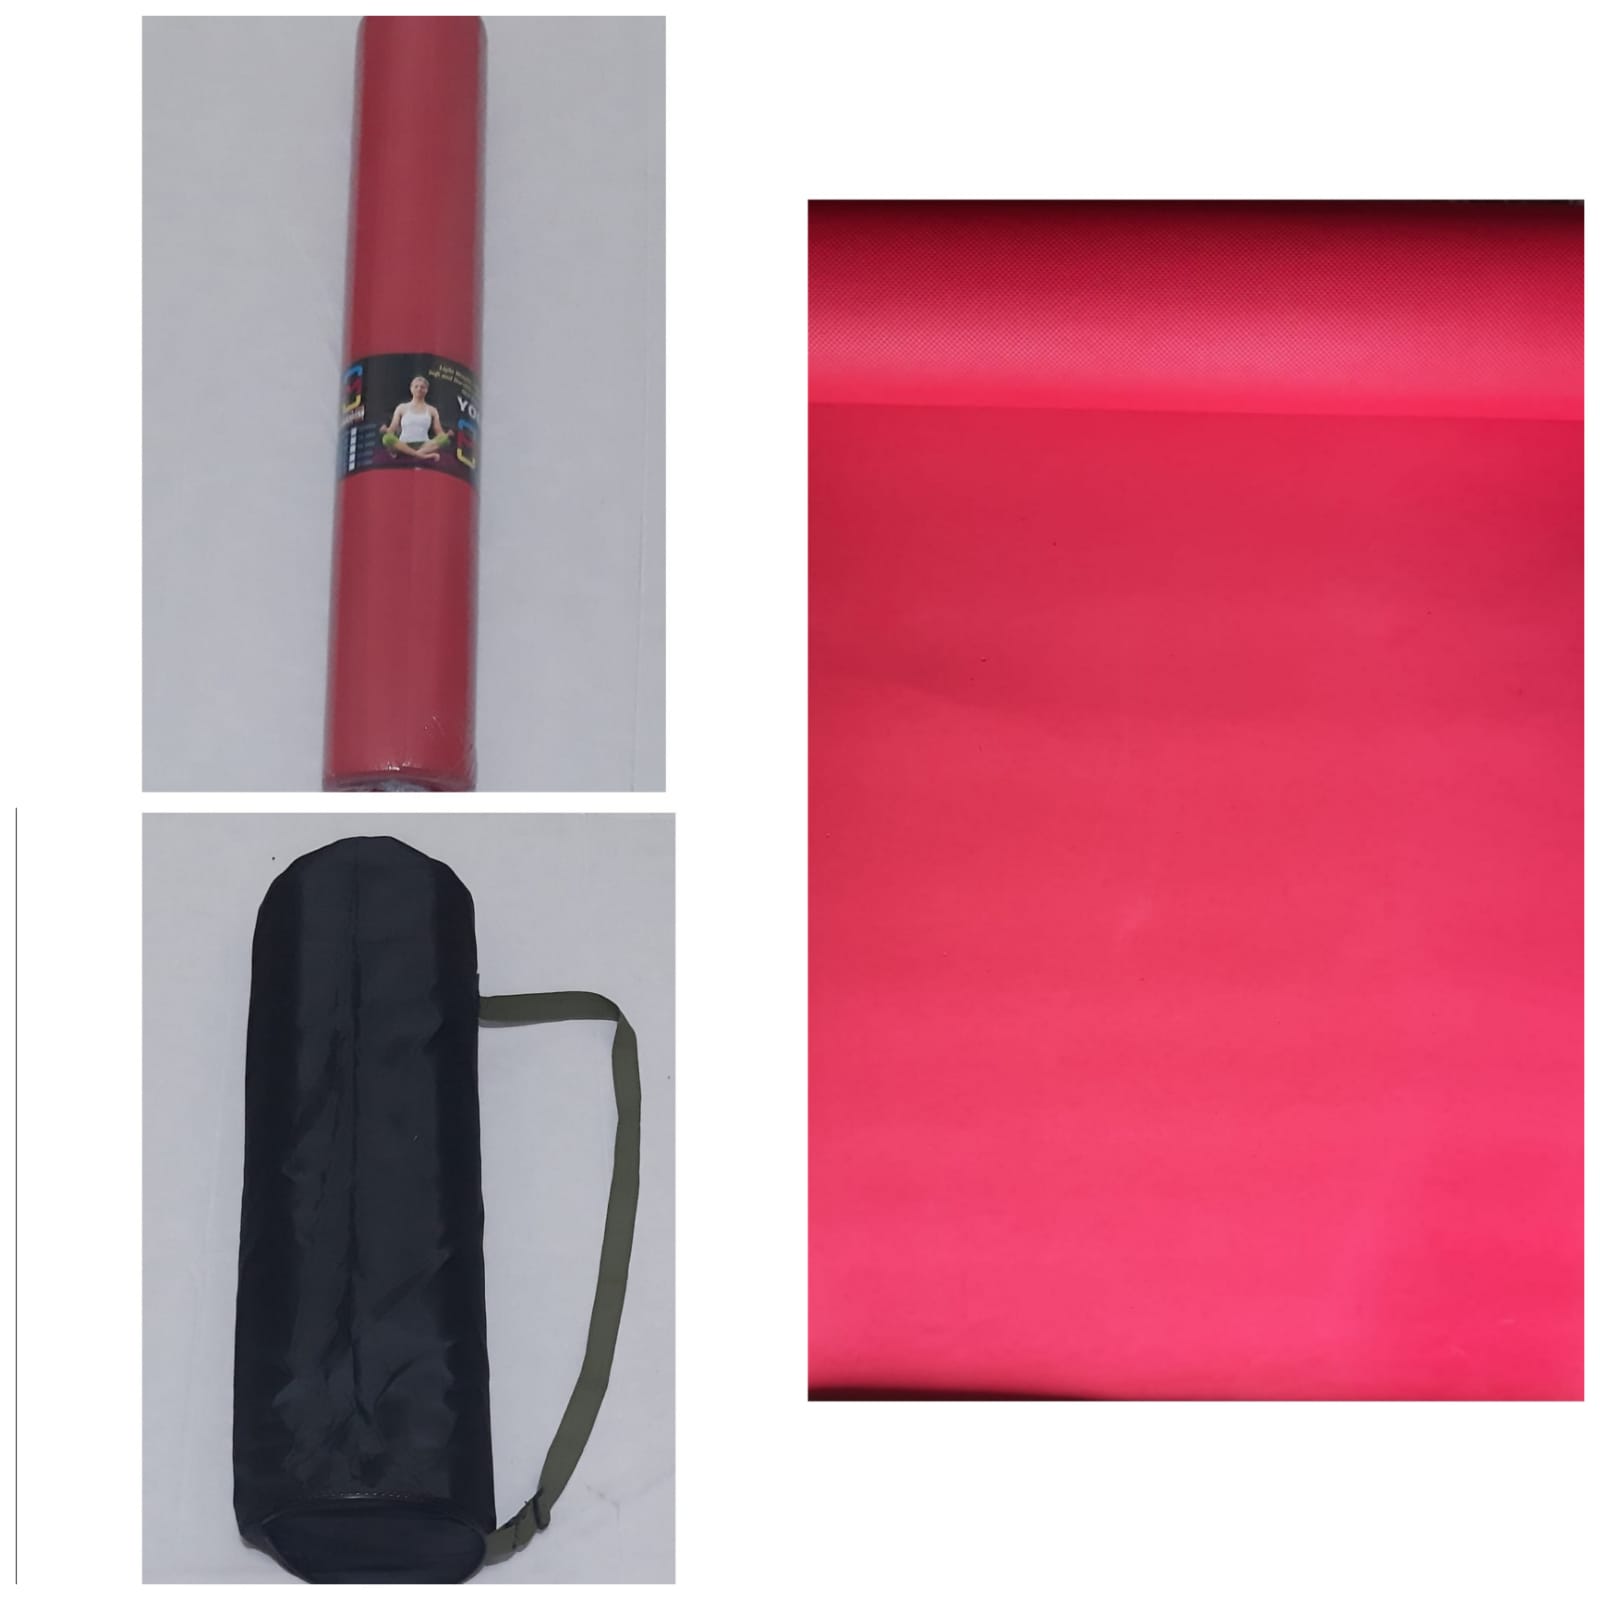 Yoga Mat (4mm) with a Carry Bag for Home Gym & Outdoor Workout, Water Resistant, Light Weight, Easy to Fold, Anti-Slip Mats for Men,Women & Kids (Red Colour)